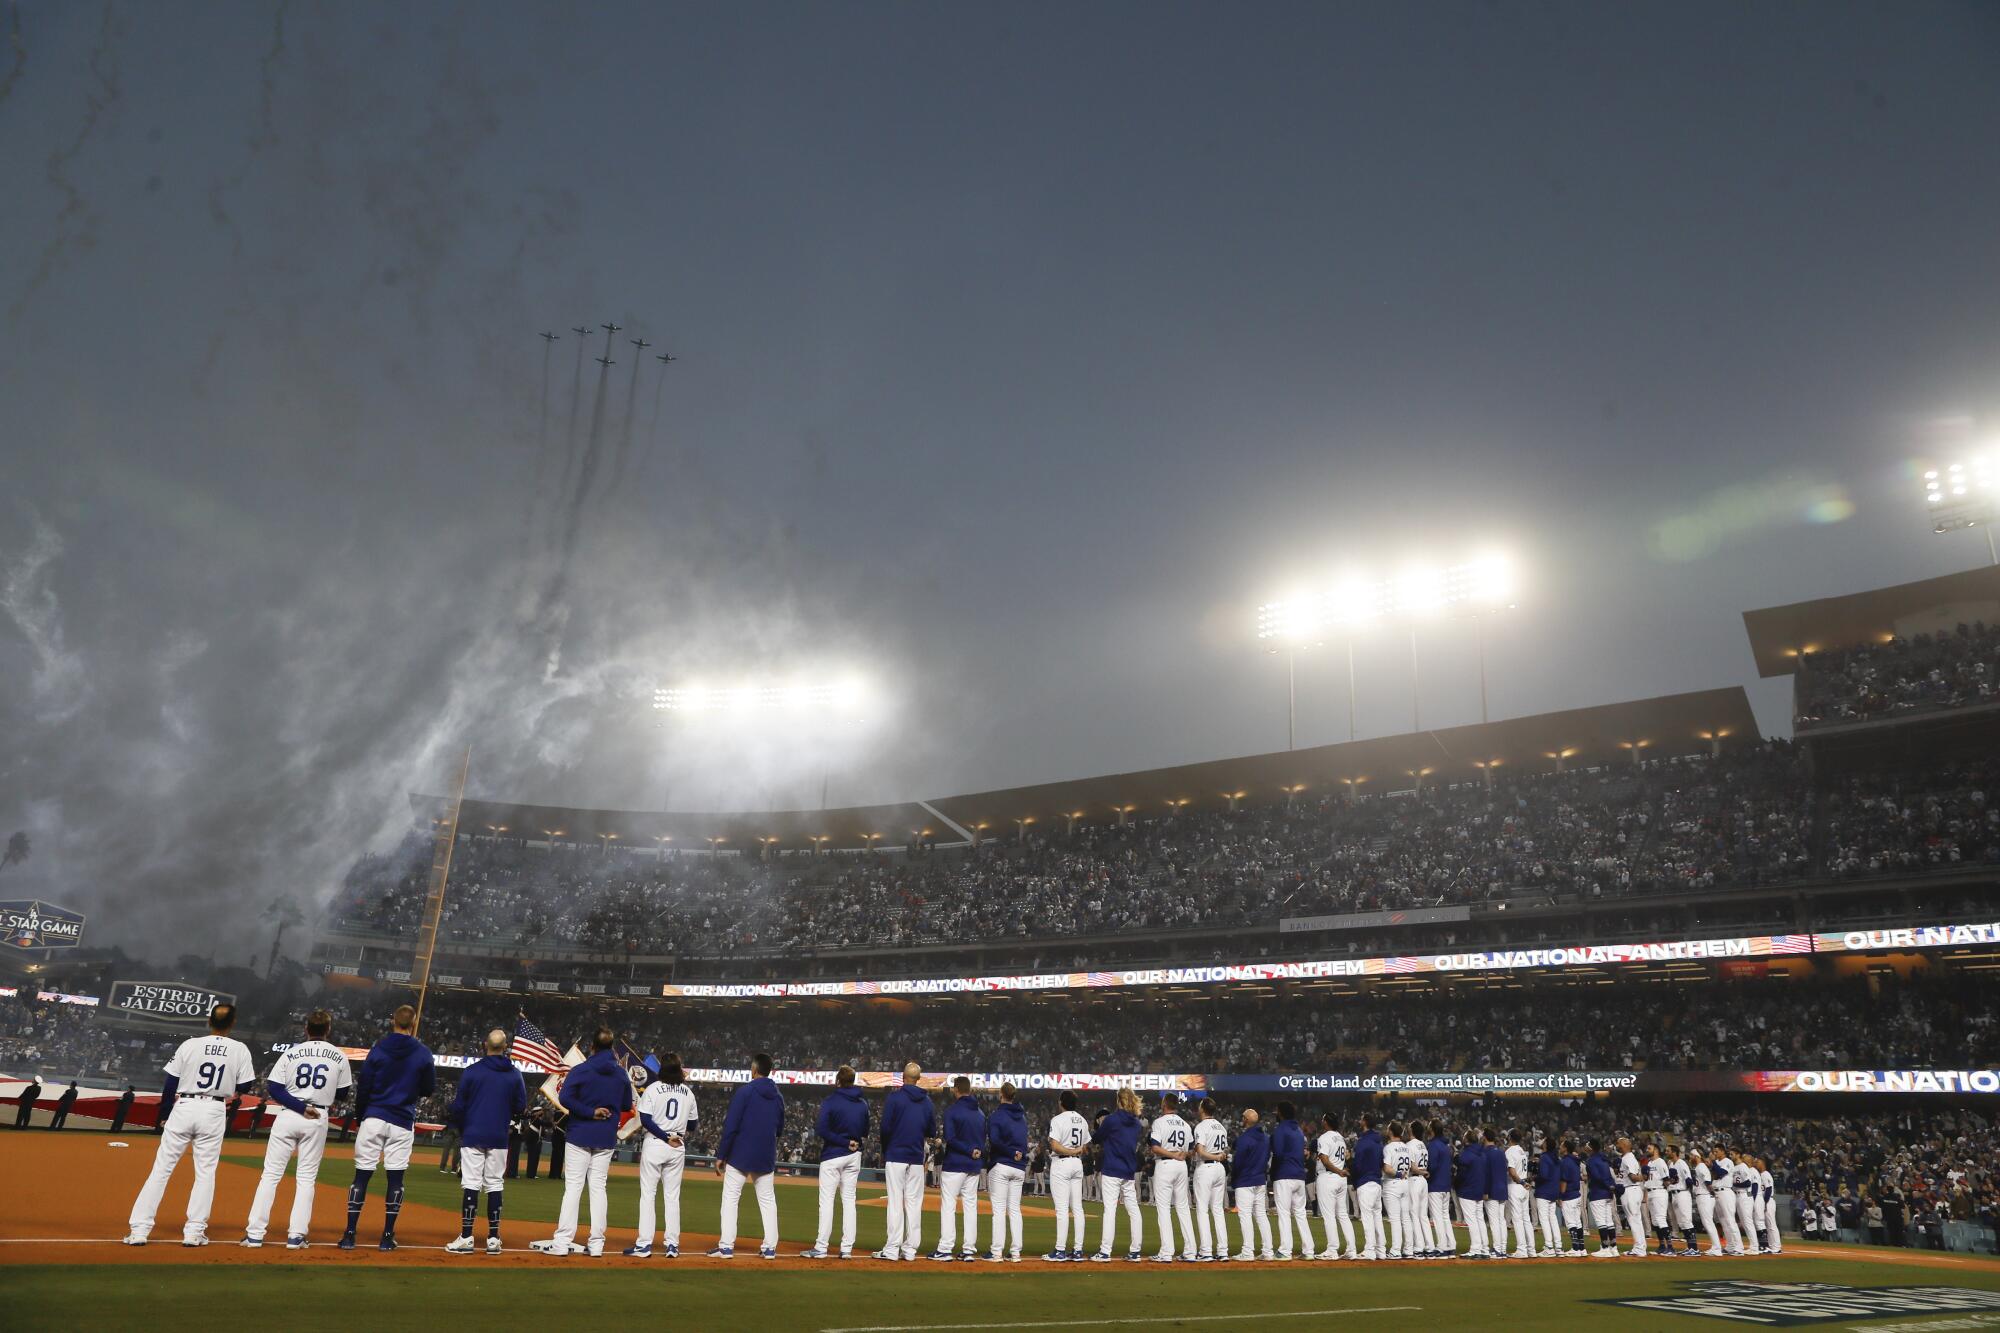  Dodgers stand for the national anthem during a flyover.